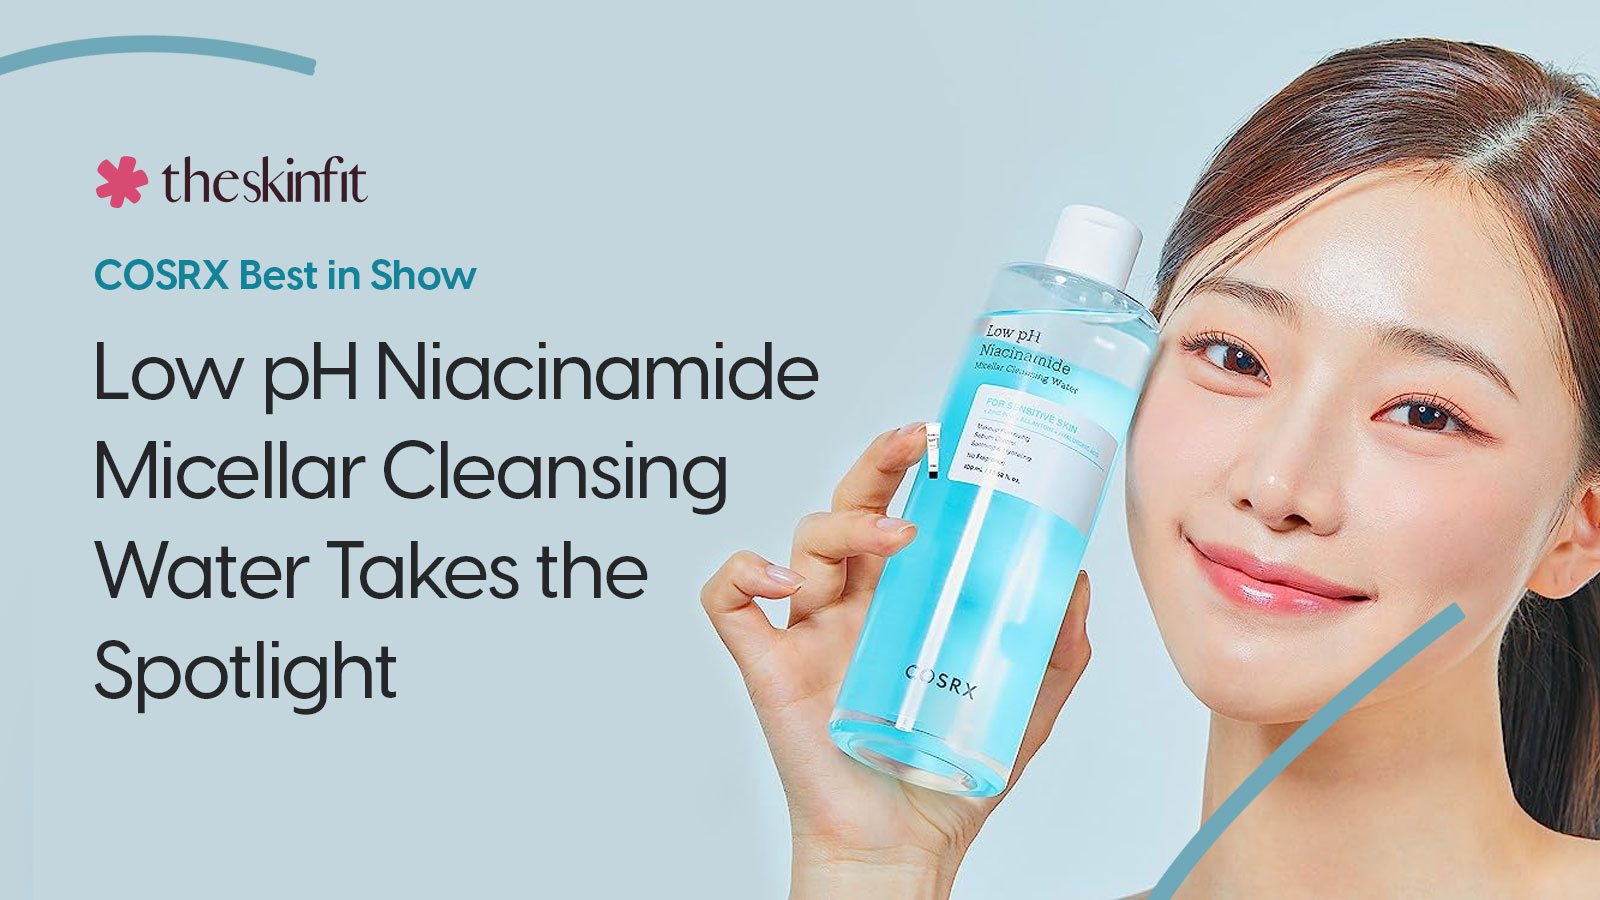 COSRX Best in Show: Low pH Niacinamide Micellar Cleansing Water Takes the Spotlight